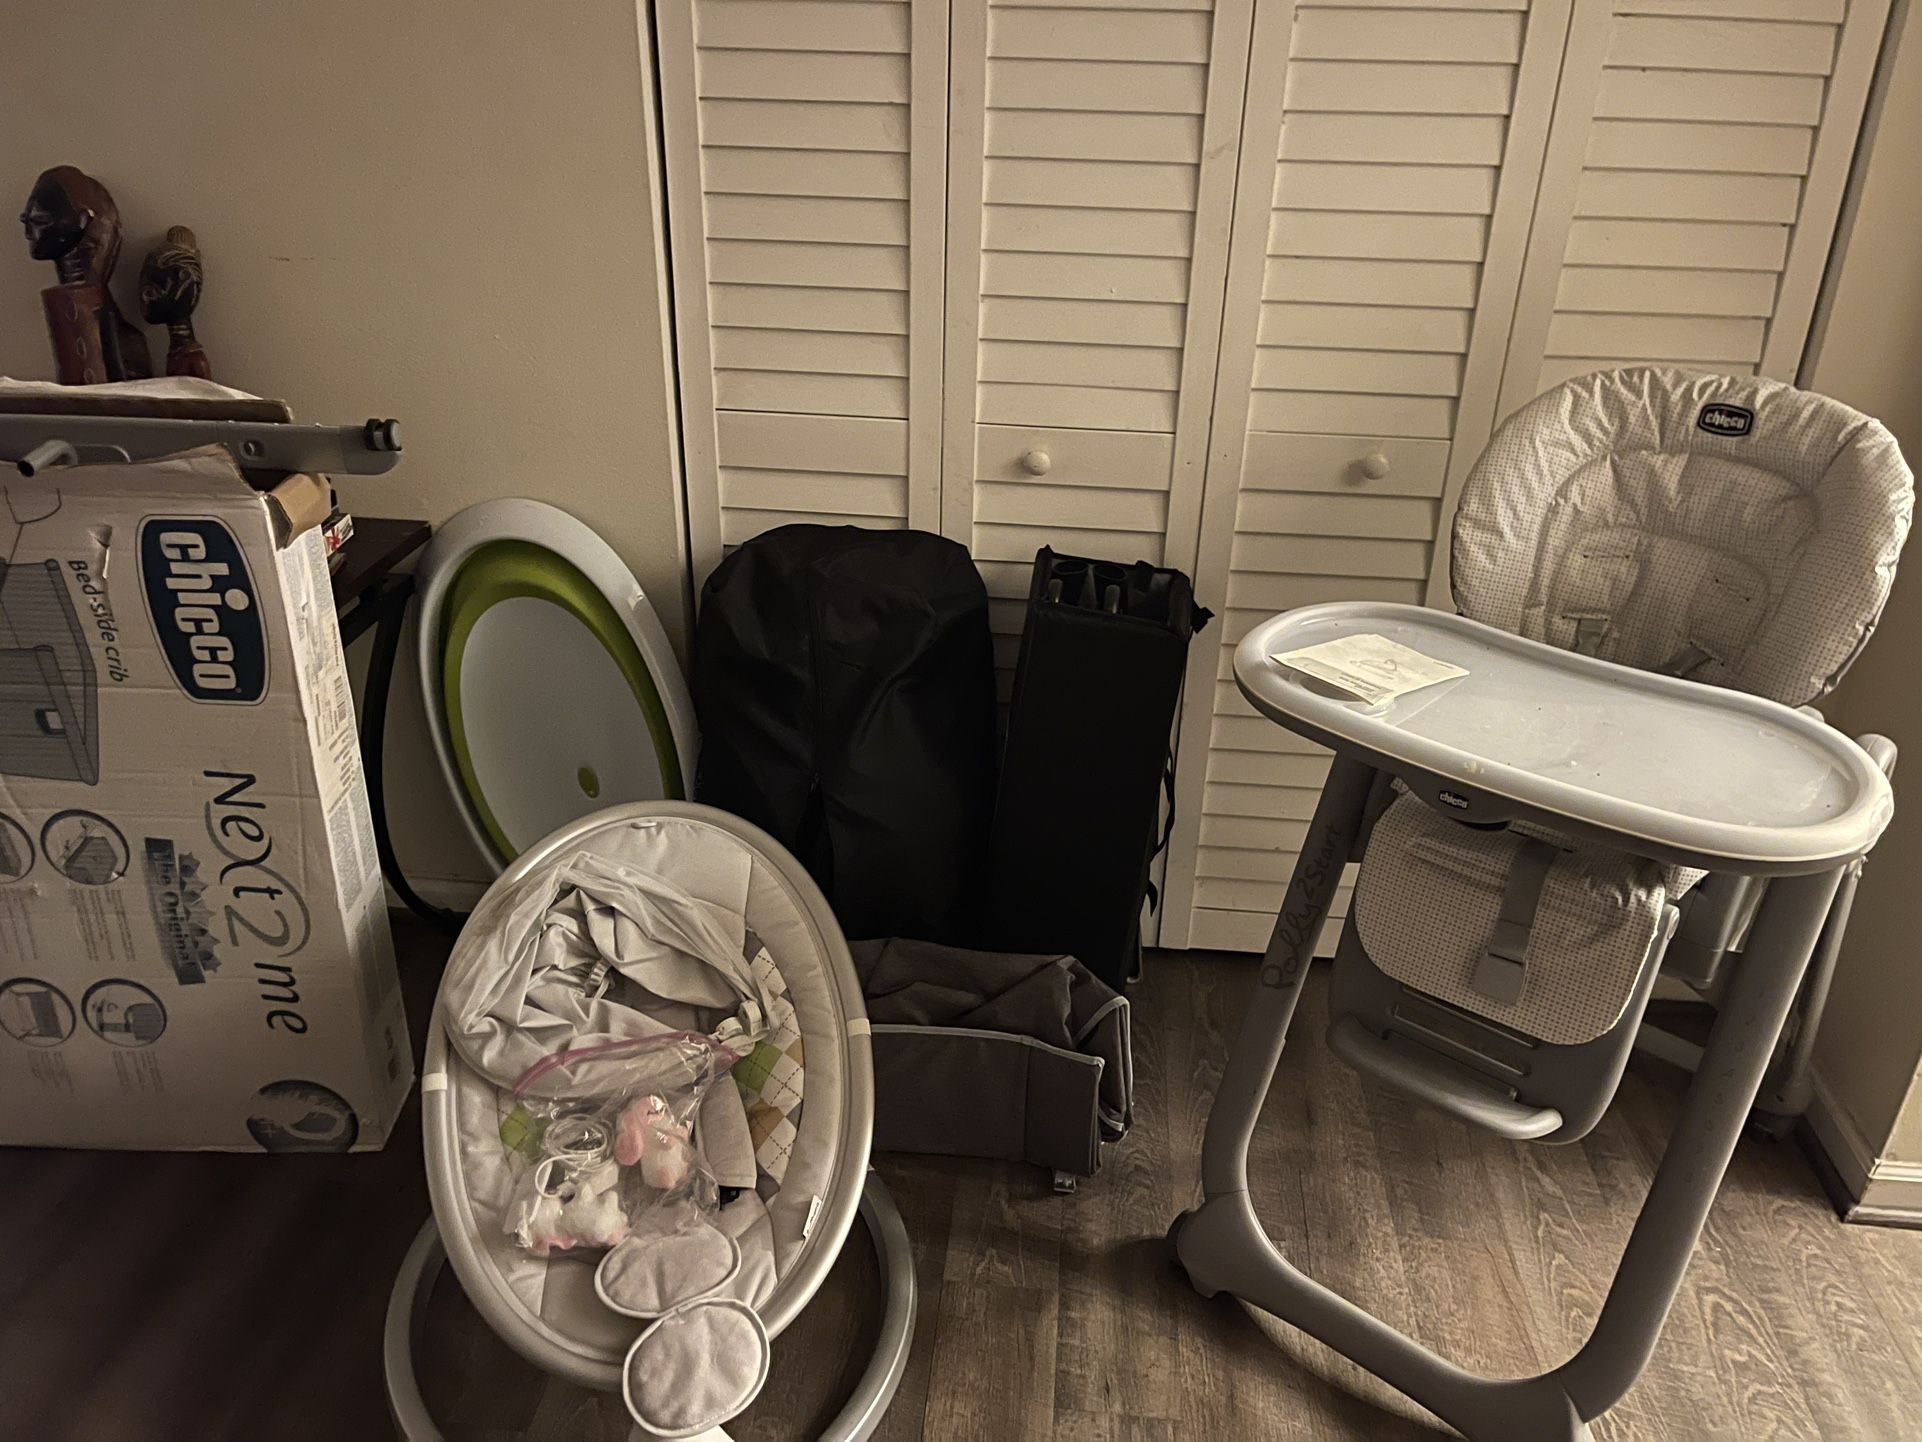 New/mildly Used Baby/ Toddler Item